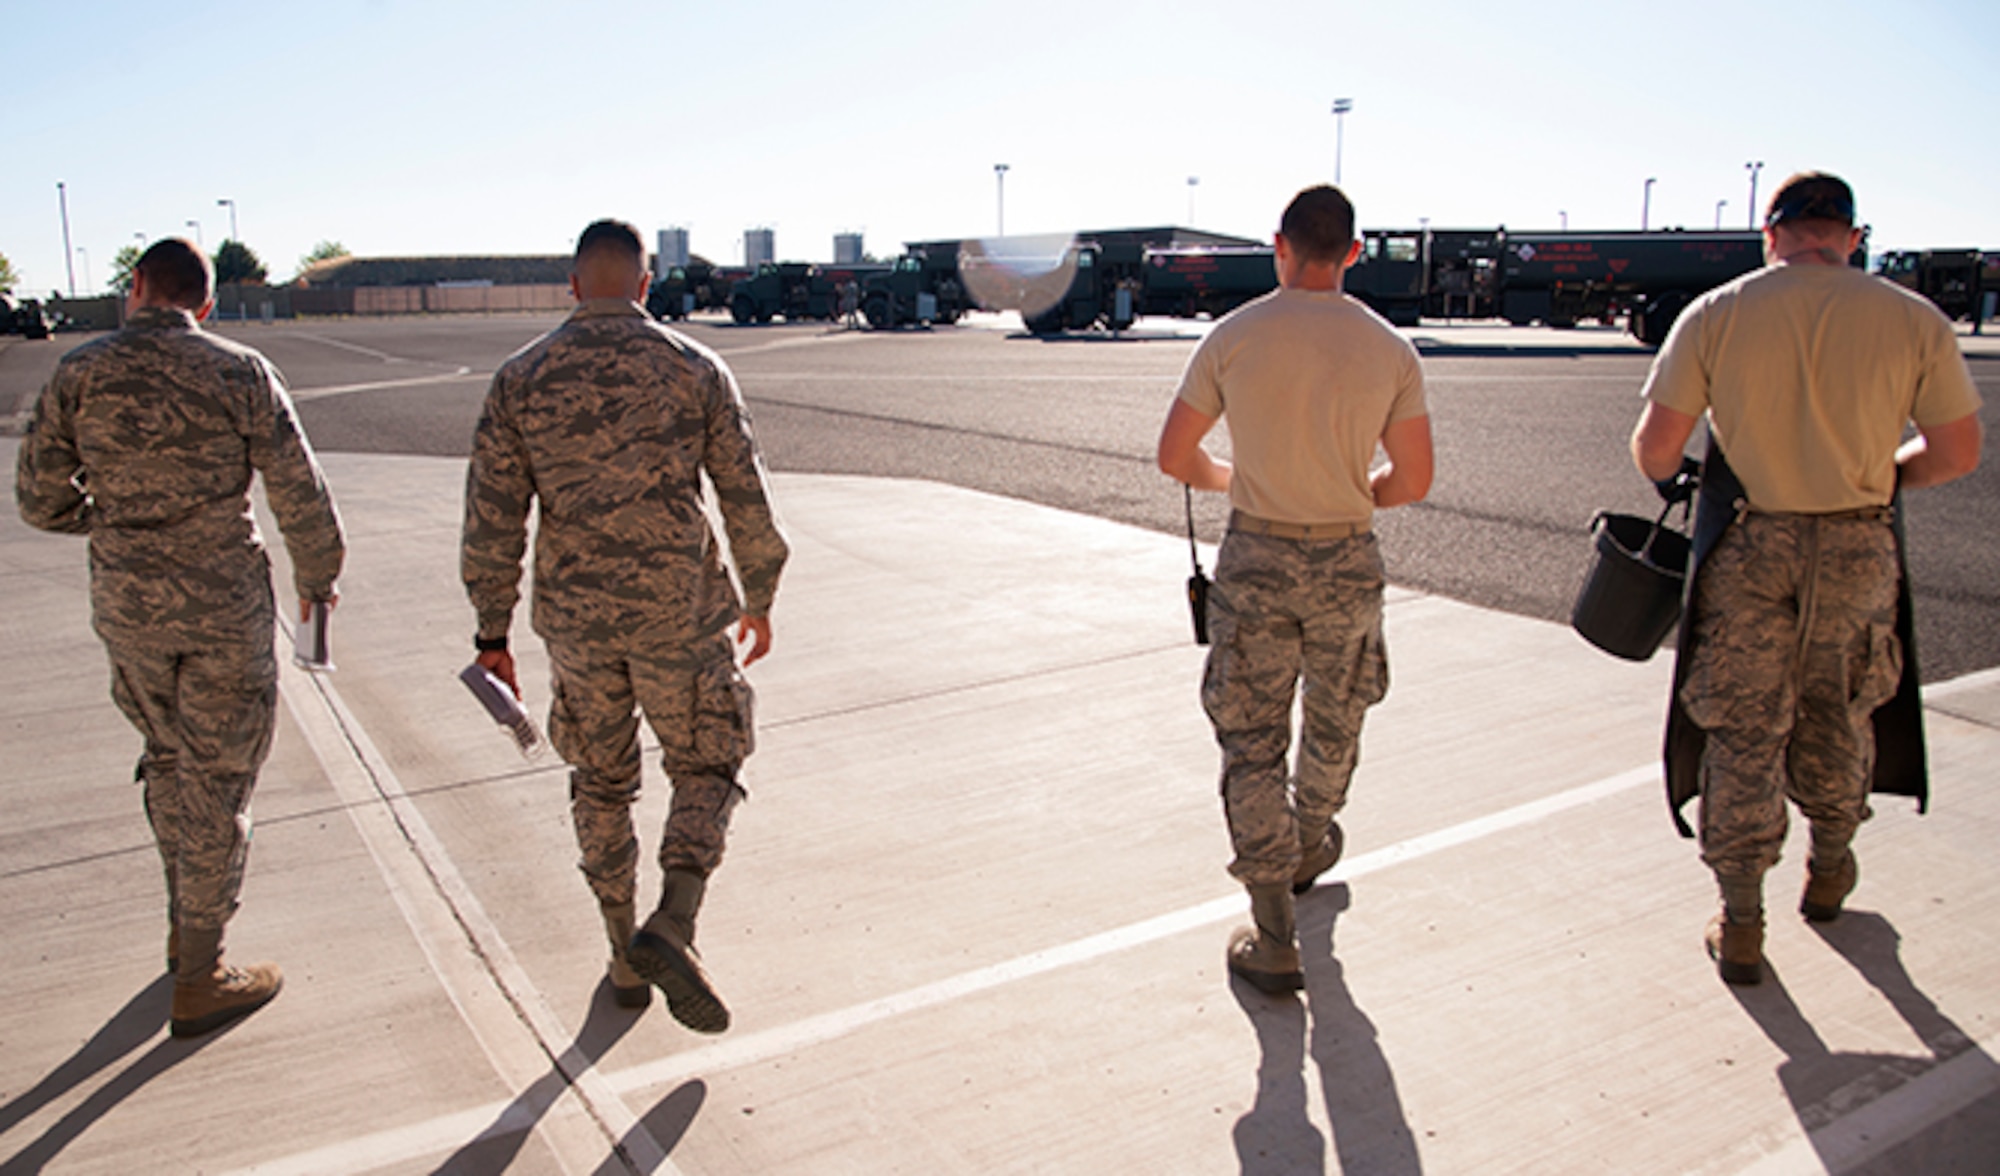 (From left to right) 92nd Logistics Readiness Squadron refueling equipment operators: Senior Airman Devin Carpenter, Airman 1st Class Robert Santana, Airman 1st Class Alexander Munson and Airman Victor Ortiz walk out to the fuel equipment staging area July 25, 2016, at Fairchild Air Force Base, Wash. At the start of every shift, fuels equipment operators go through an extensive checklist to ensure operational safety. (U.S. Air Force photo/ Airman 1st Class Ryan Lackey)